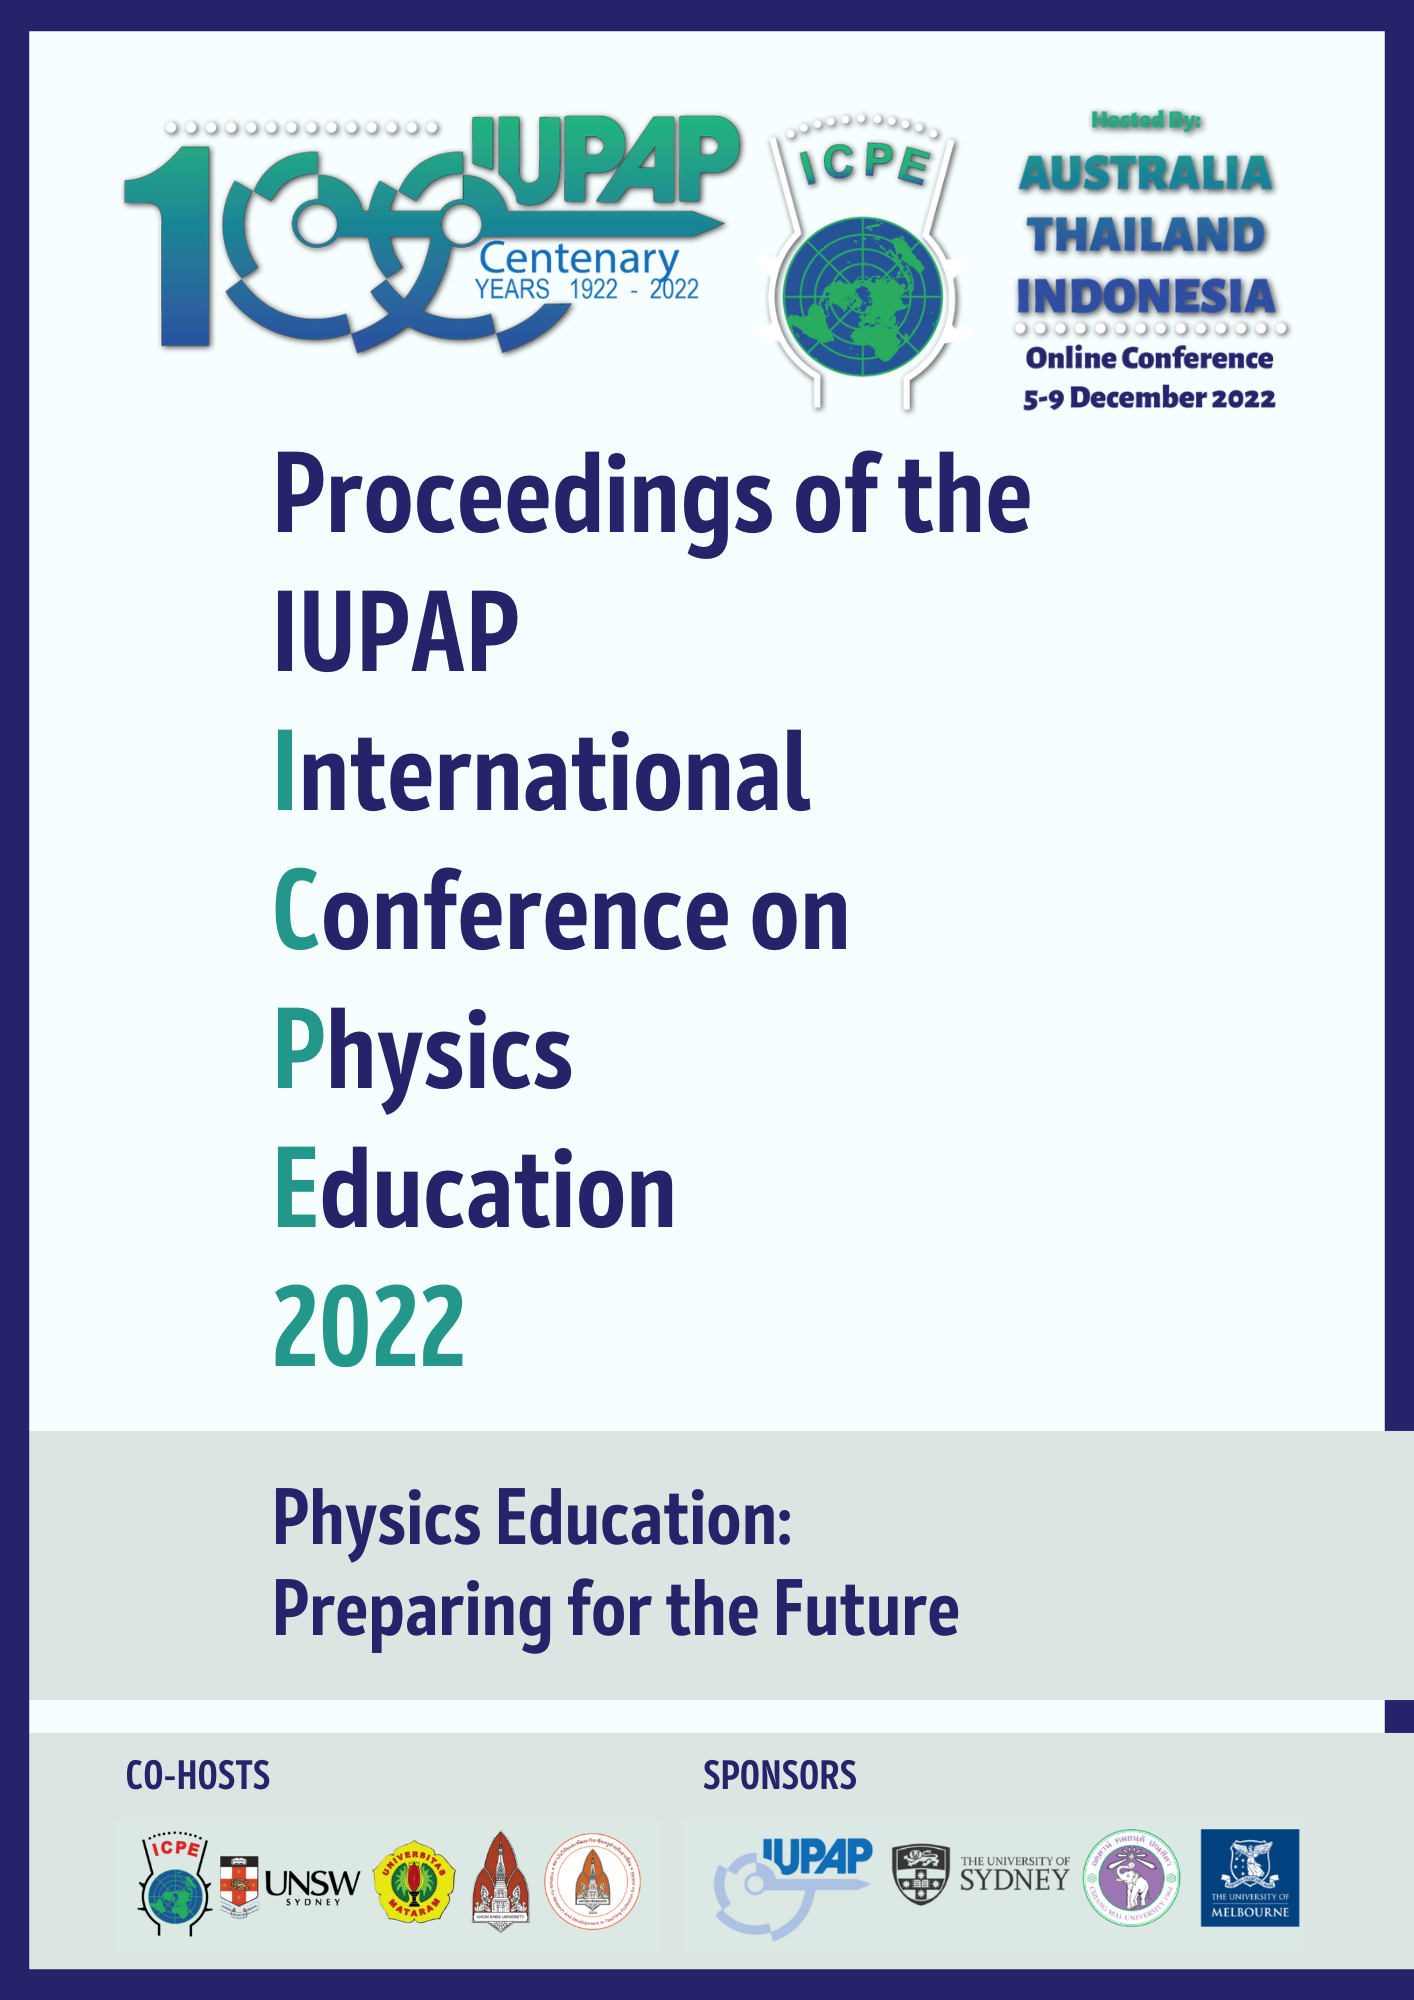 					View Proceedings of the IUPAP International Conference on Physics Education 2022
				